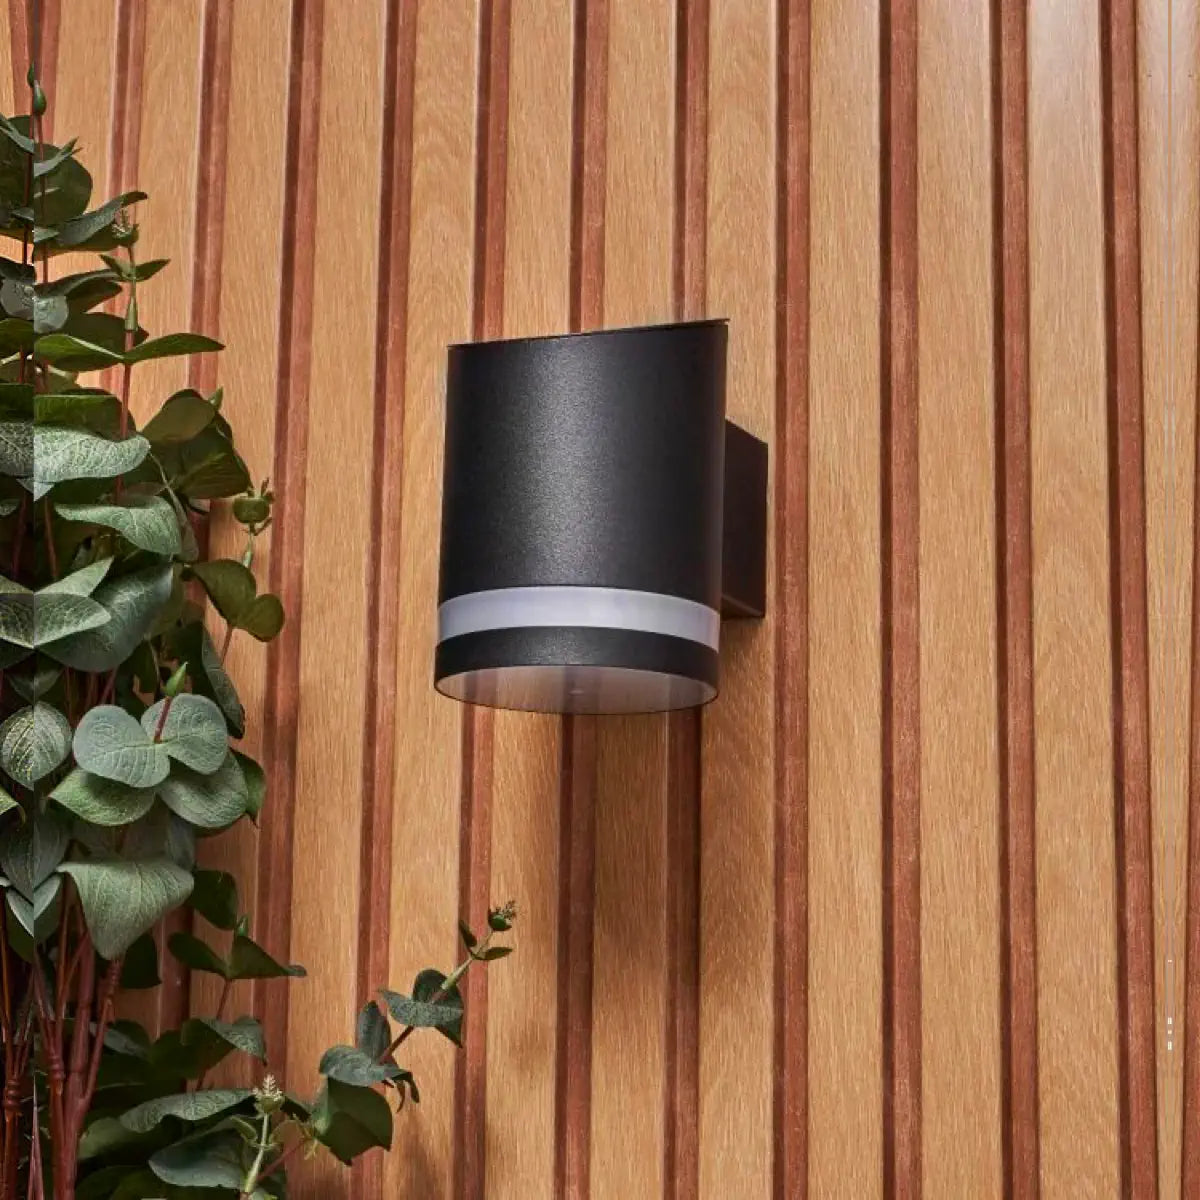 A modern, dark grey, cylindrical solar-powered outdoor wall light mounted on a vertical wooden panel wall with a striped pattern. To the left of the light fixture, there is a green plant with round leaves, adding a touch of nature to the setting. The sleek design of the light complements the natural wood texture and greenery.